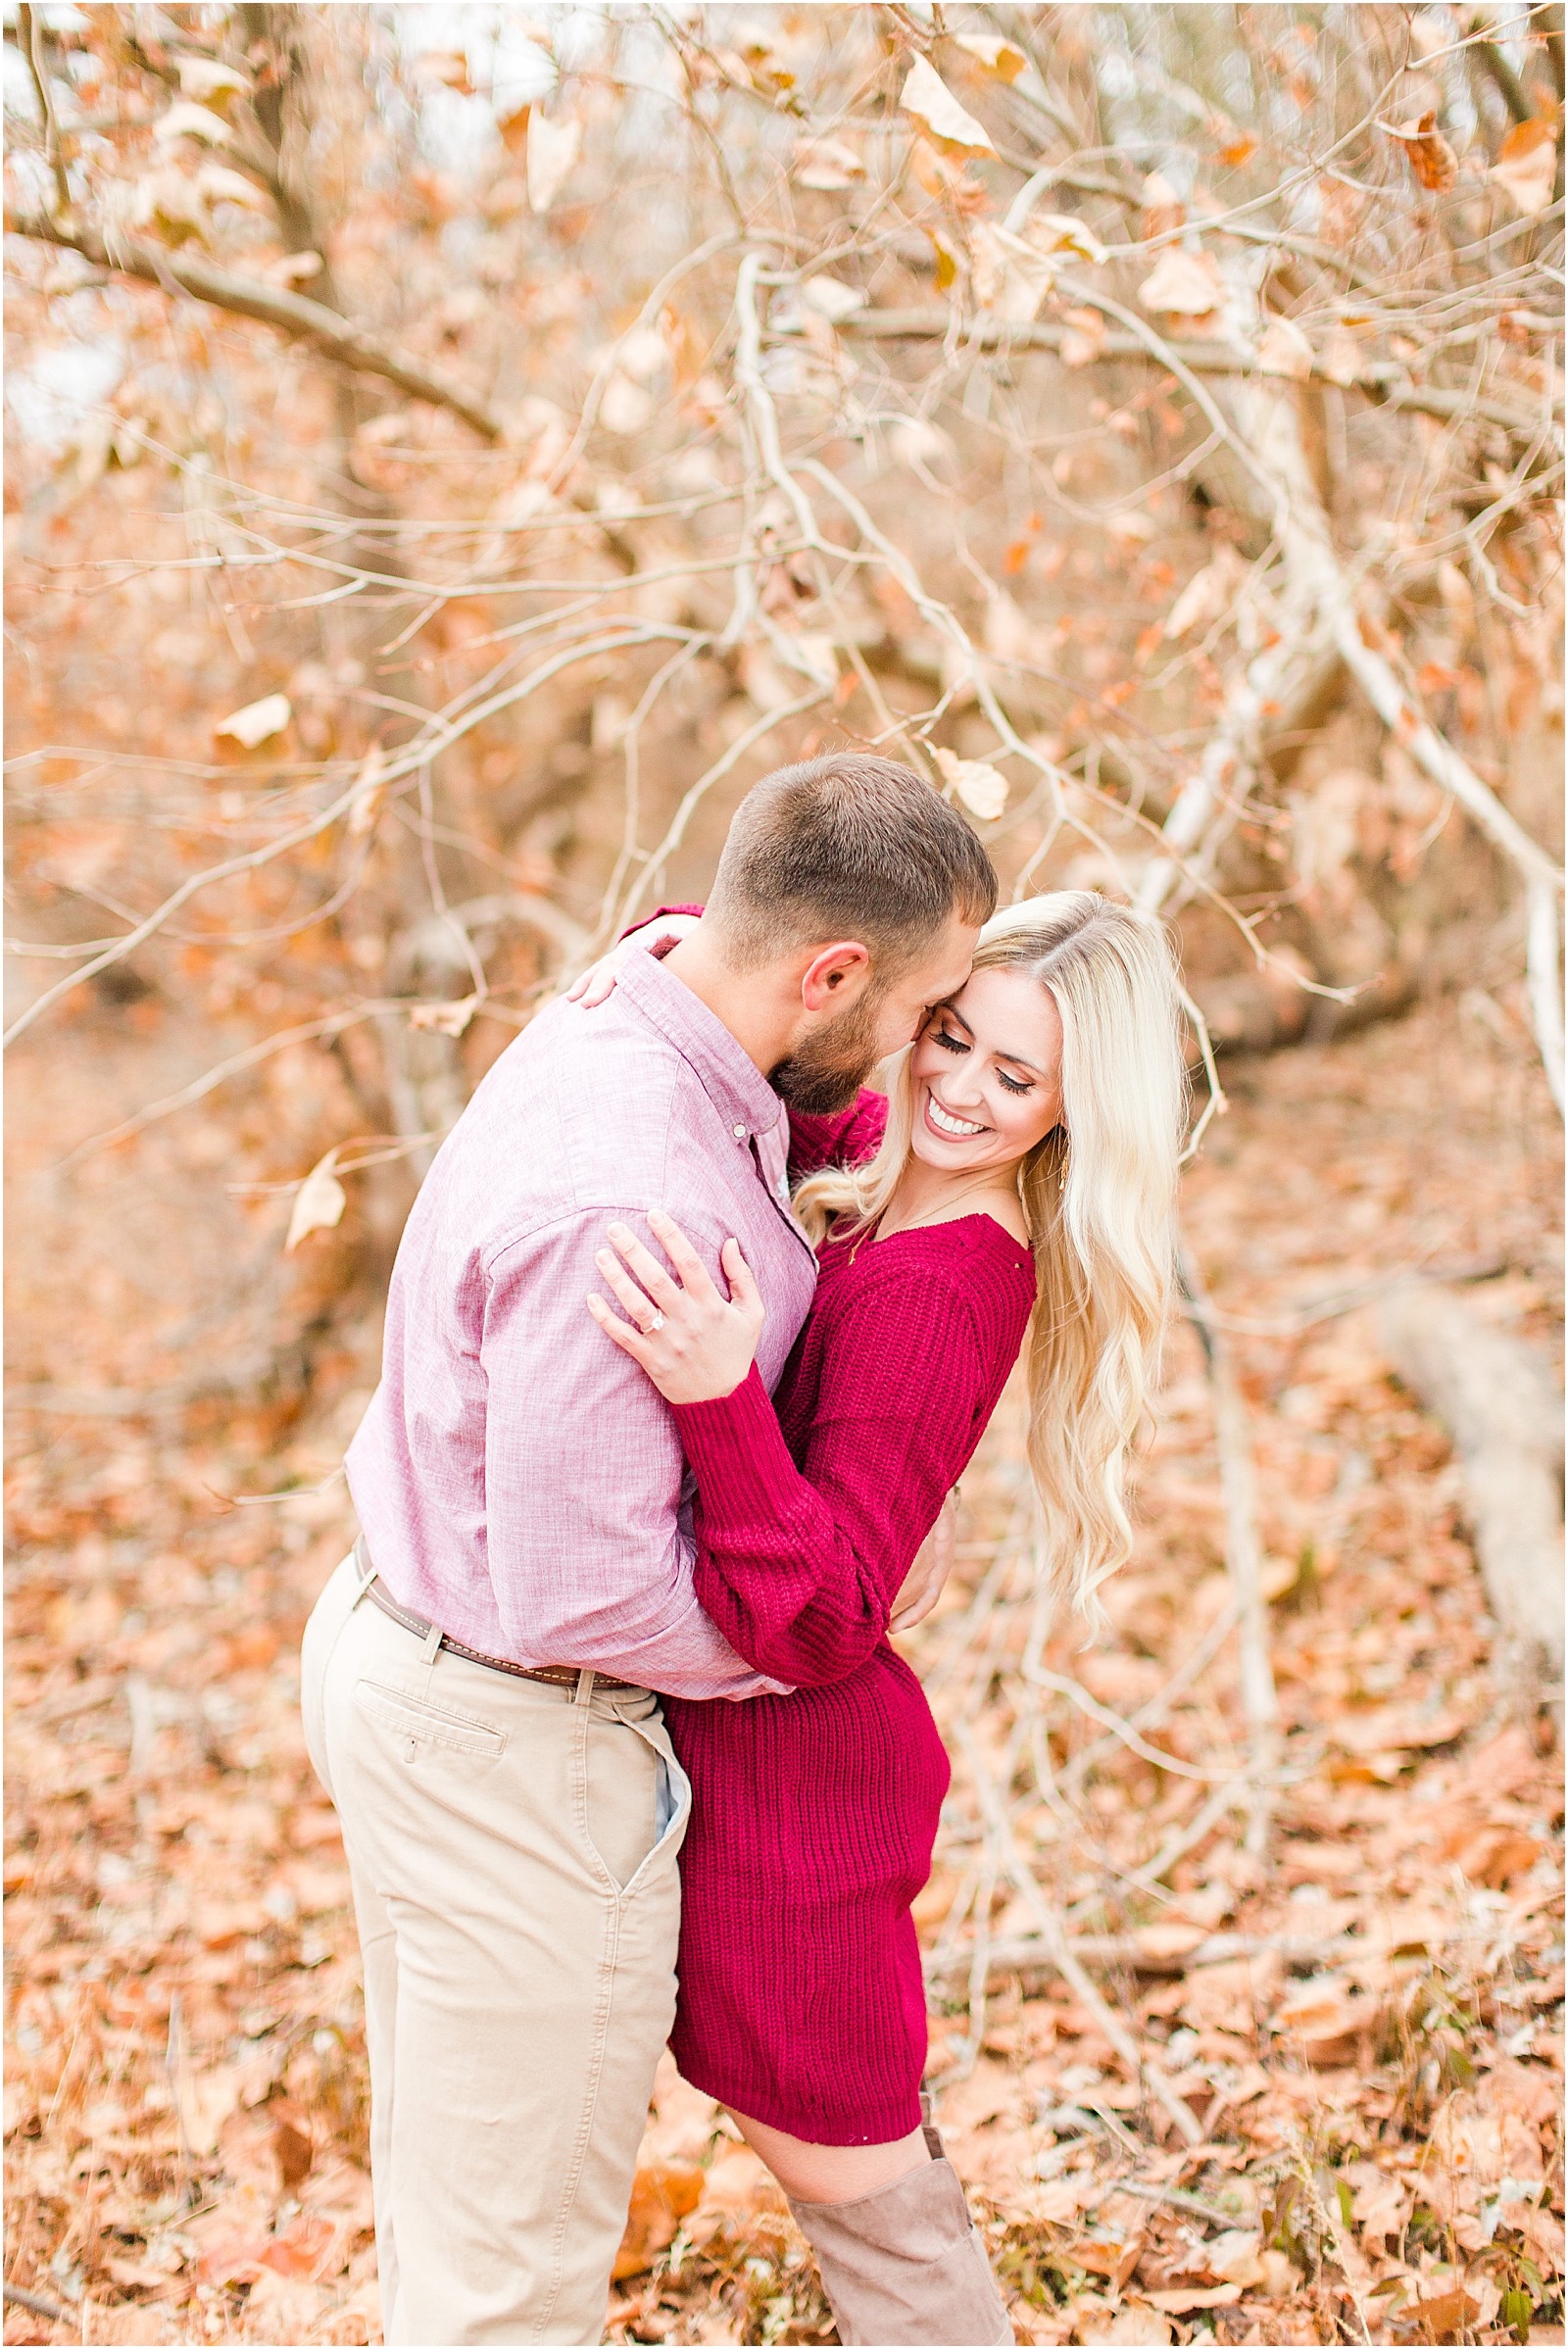 An sweet and snuggly fall anniversary session in Loogootee, Indiana. | #anniversarysession #fallsession #southernindianawedding | 021.jpg